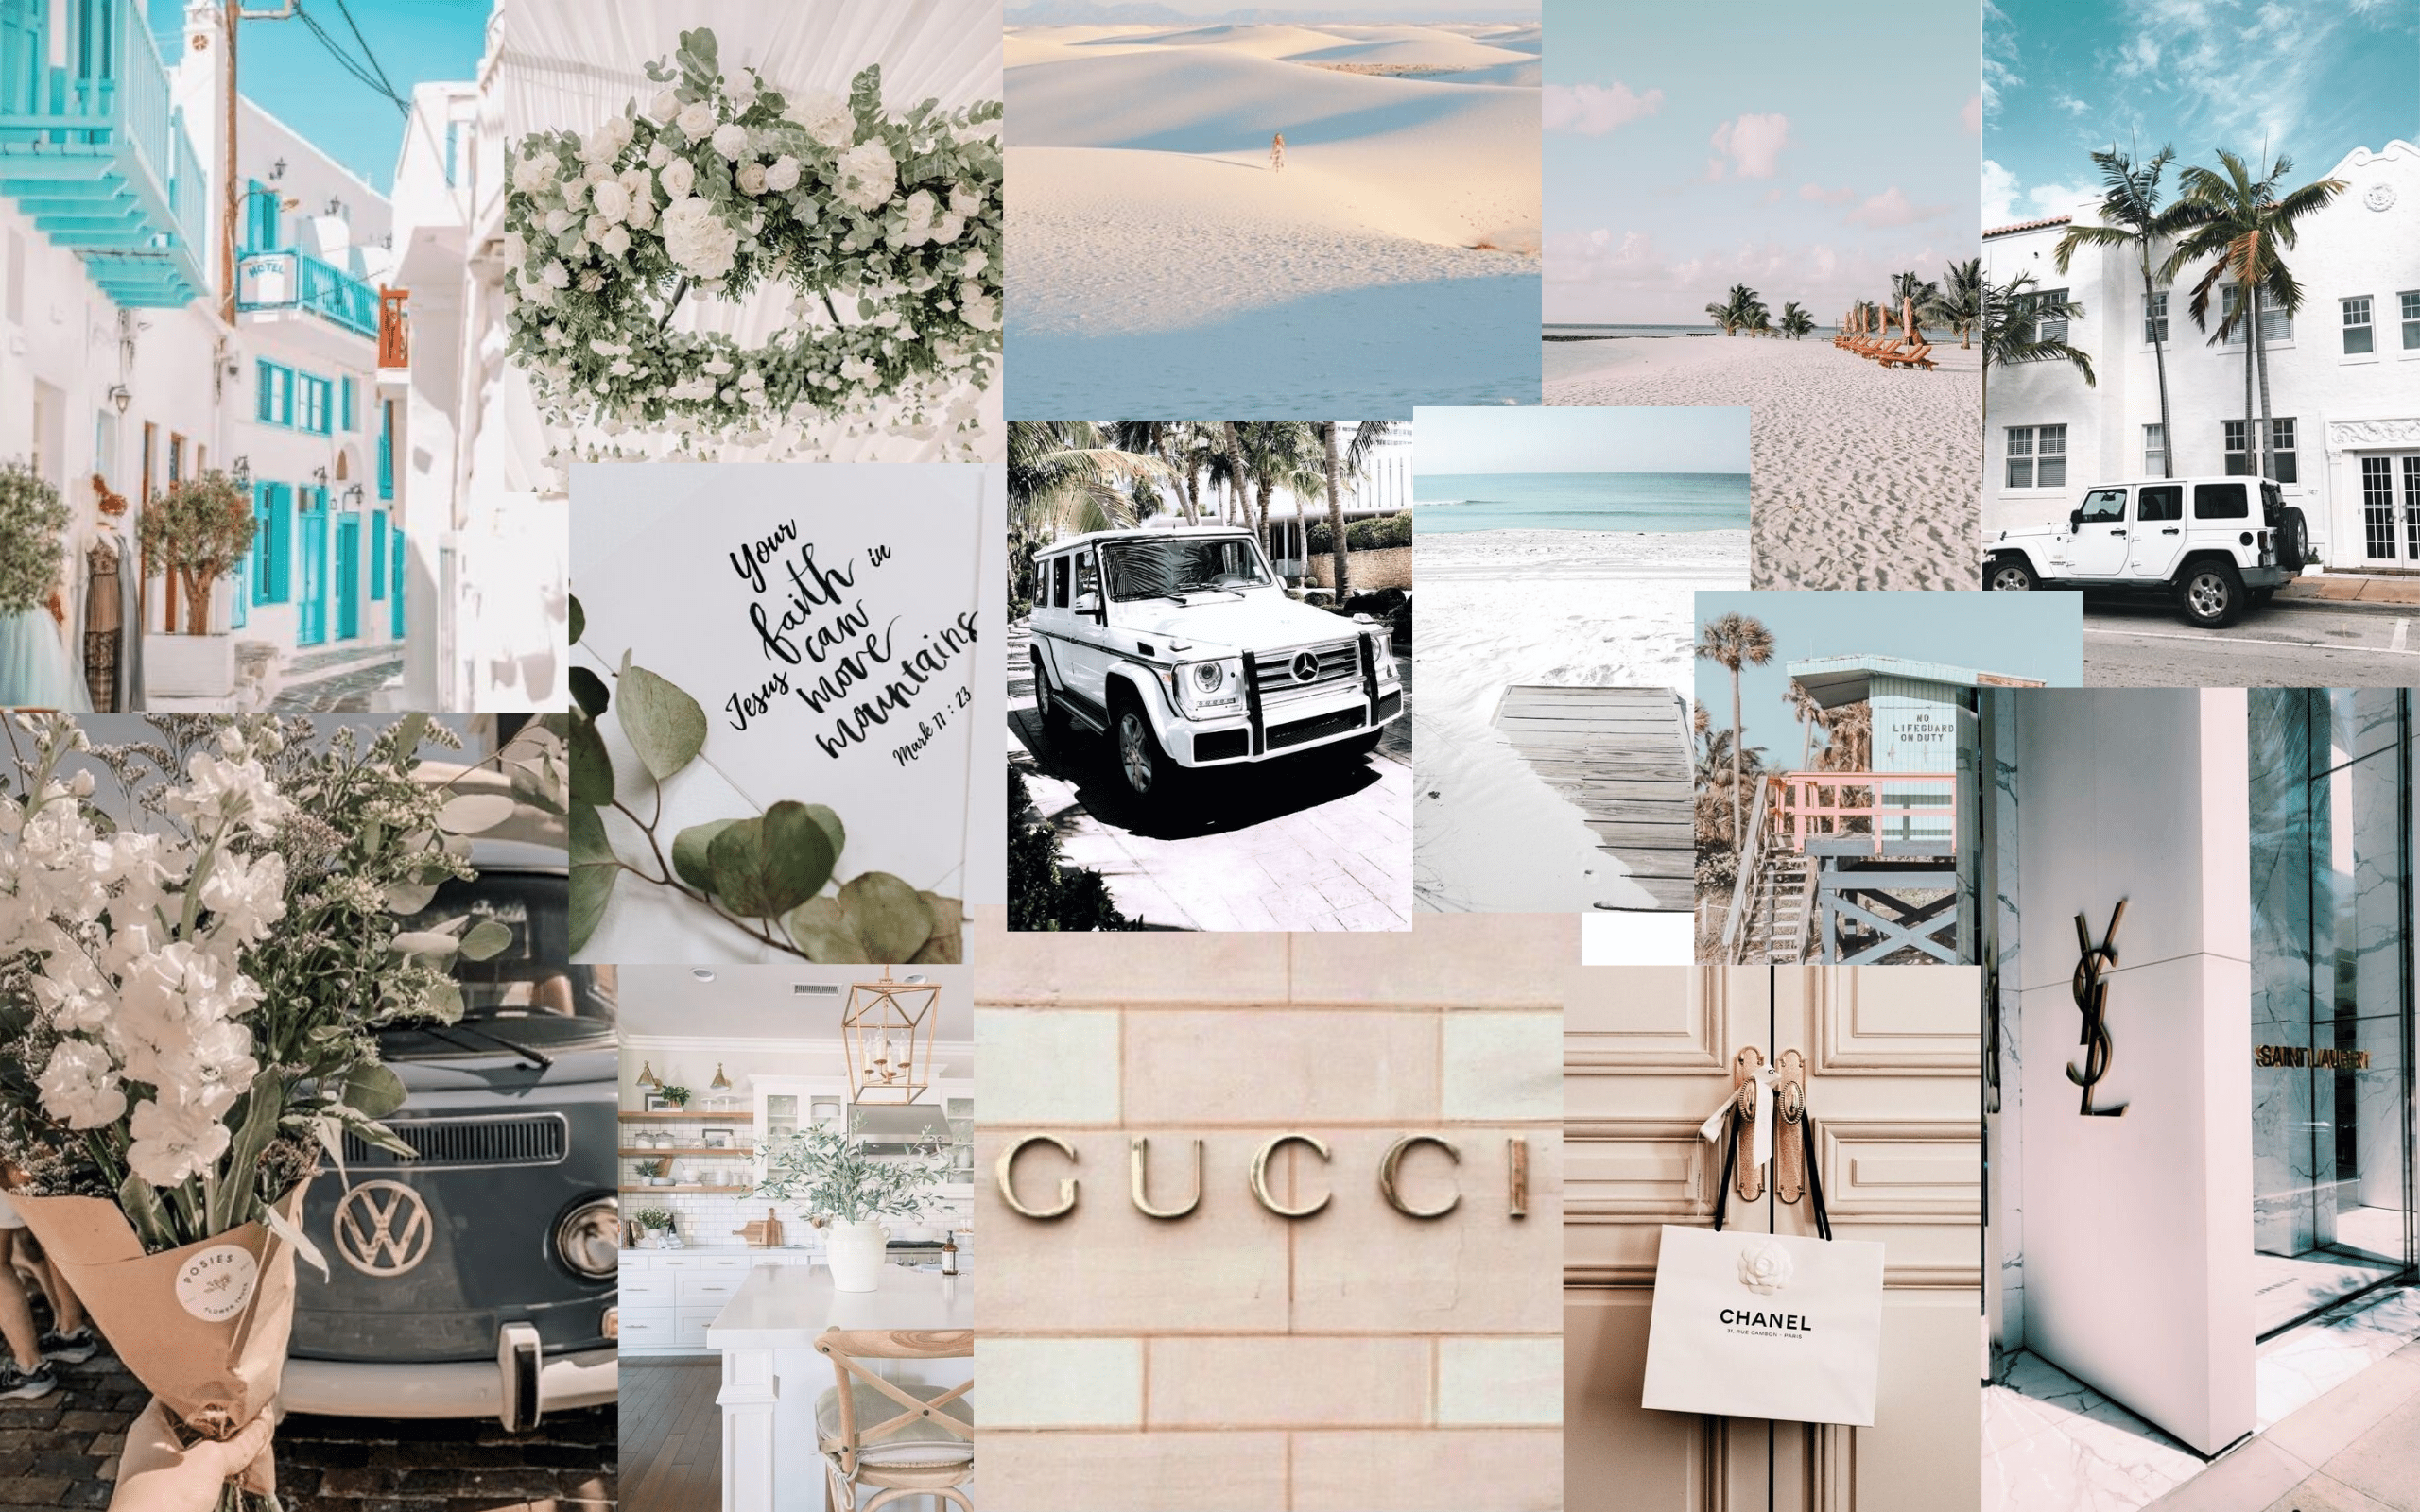 A collage of images including a car, a beach, and a Chanel bag. - Chanel